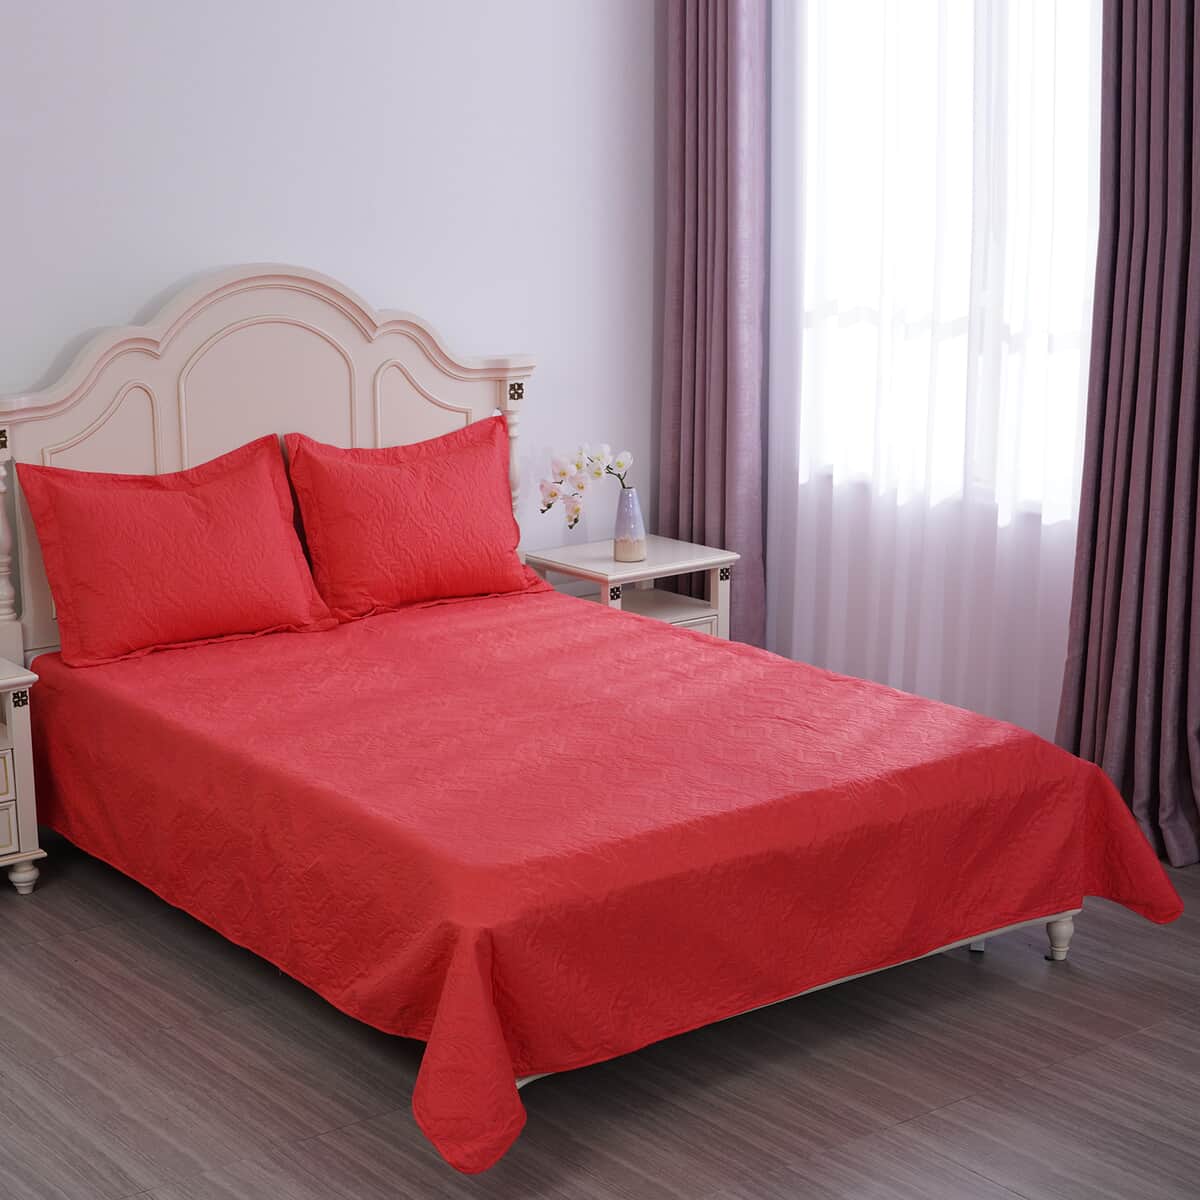 Homesmart 3 Pcs Solid Red Pinsonic Quilt Bedding Set - Queen Size image number 0